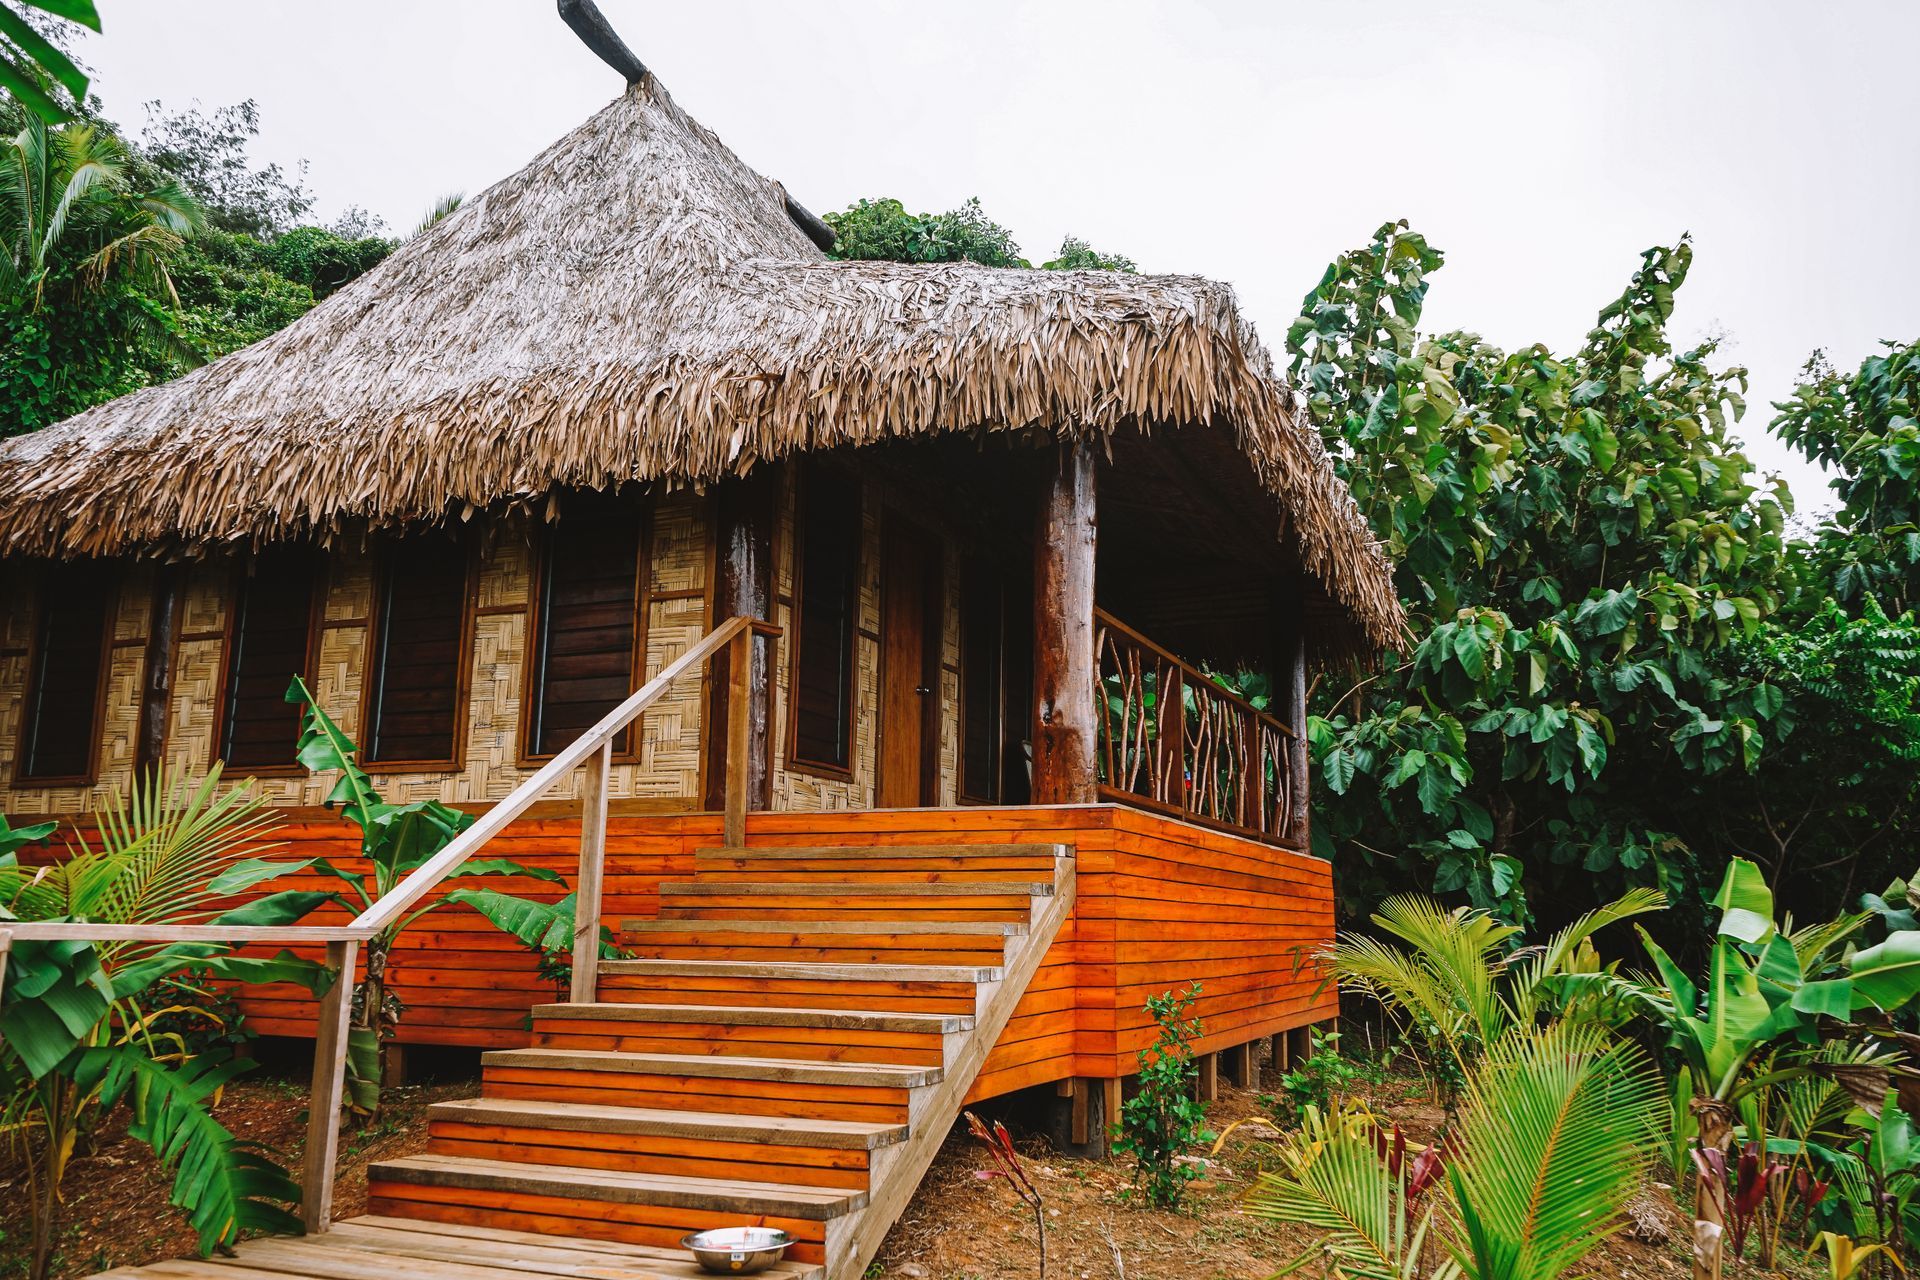 The traditionally thatched Fijian styled Oceanfront bure at Oneta Resort in Kadavu